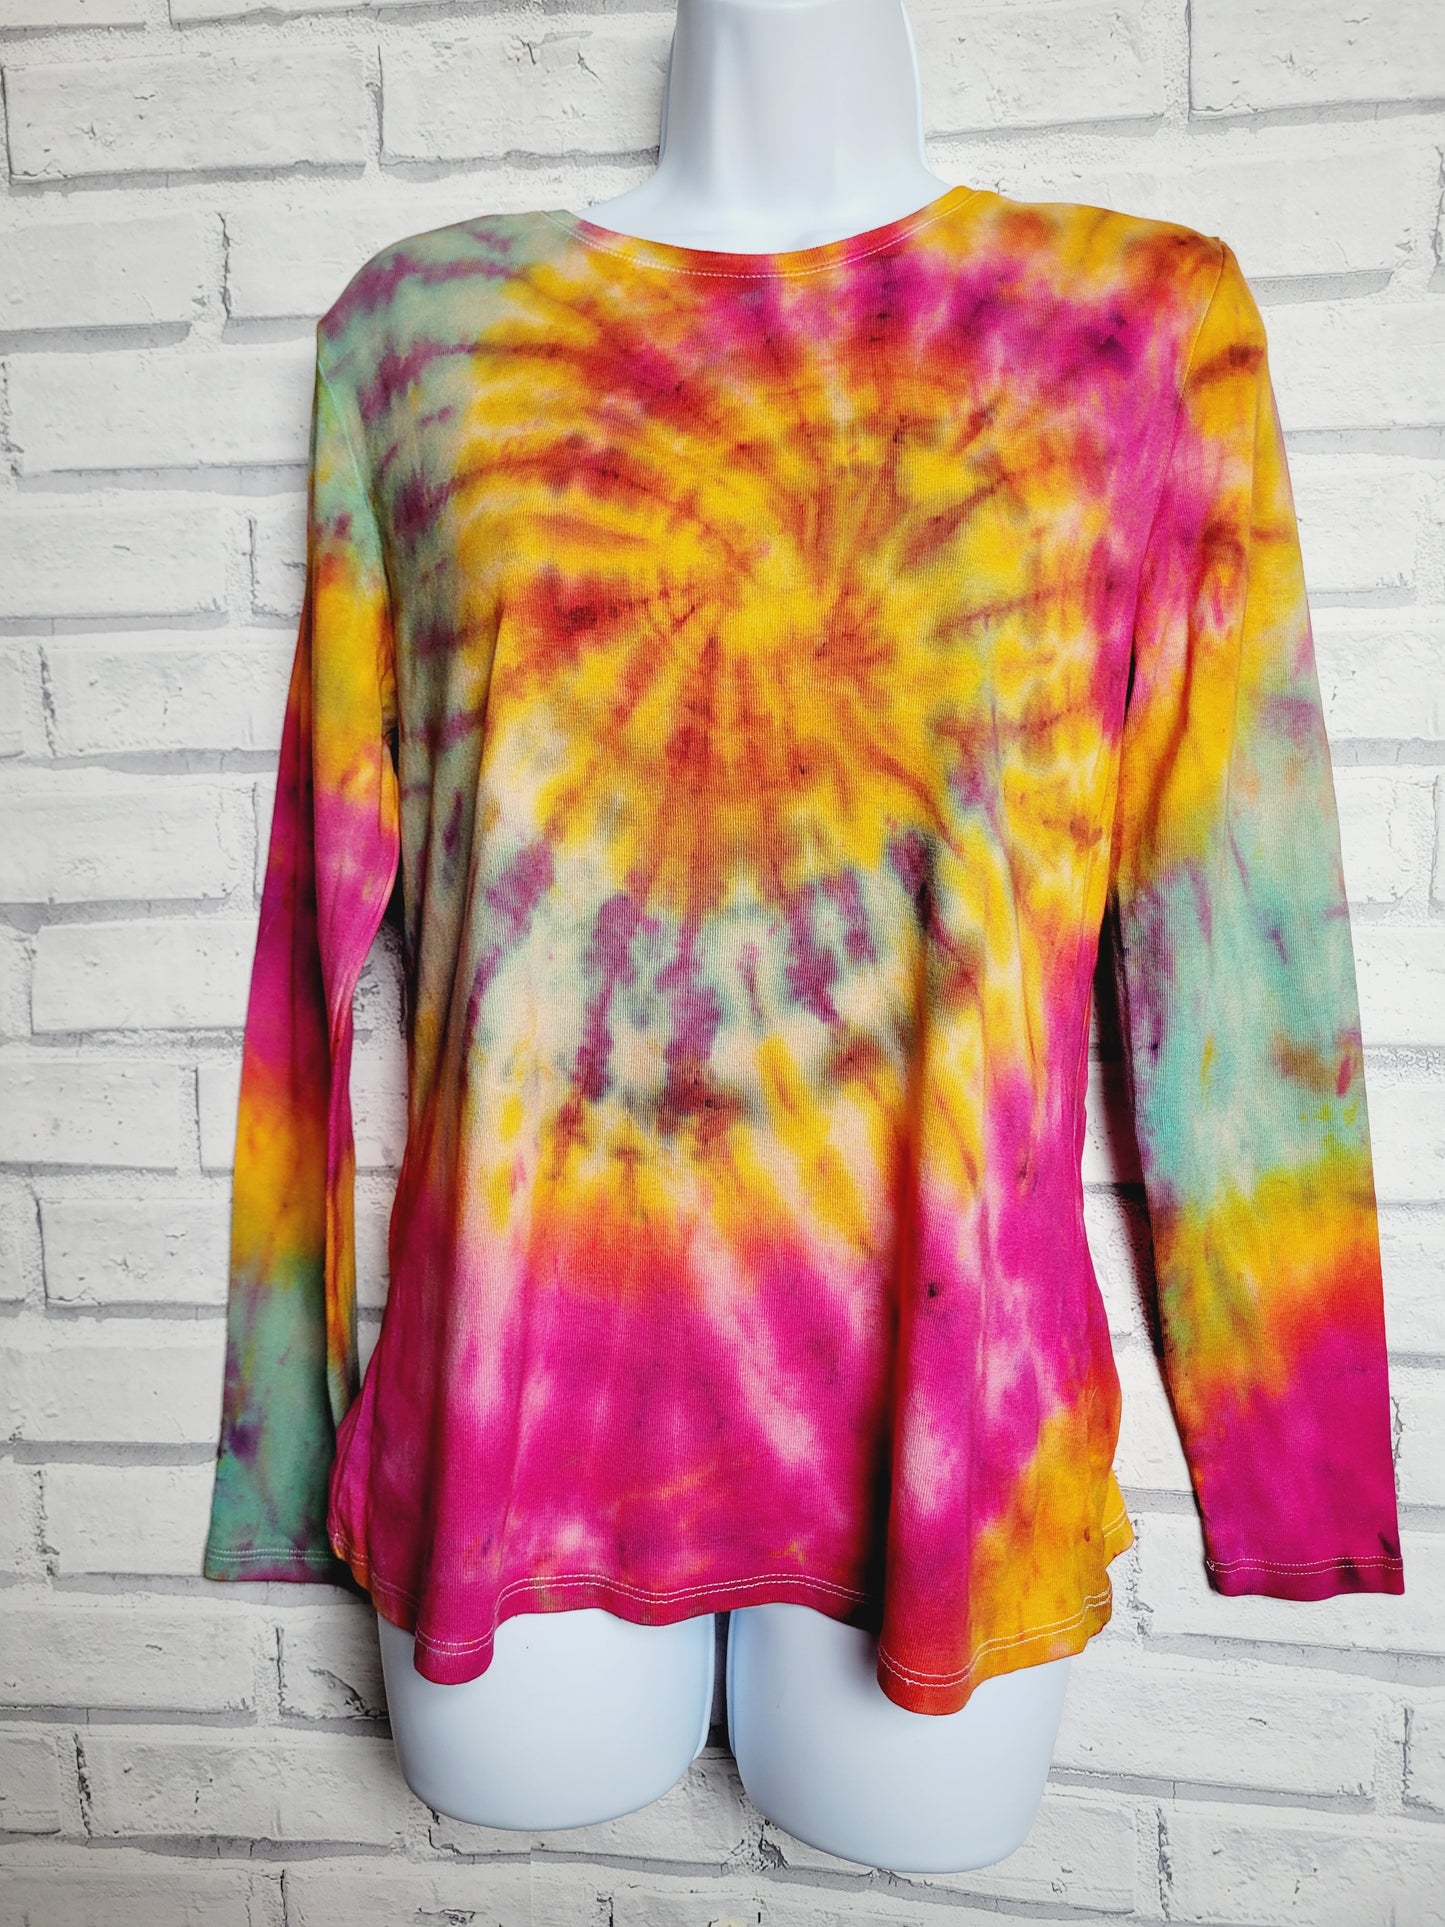 Long Sleeve Tie Dye Top UK 16/ US 12 in Yellow, Pink and Green